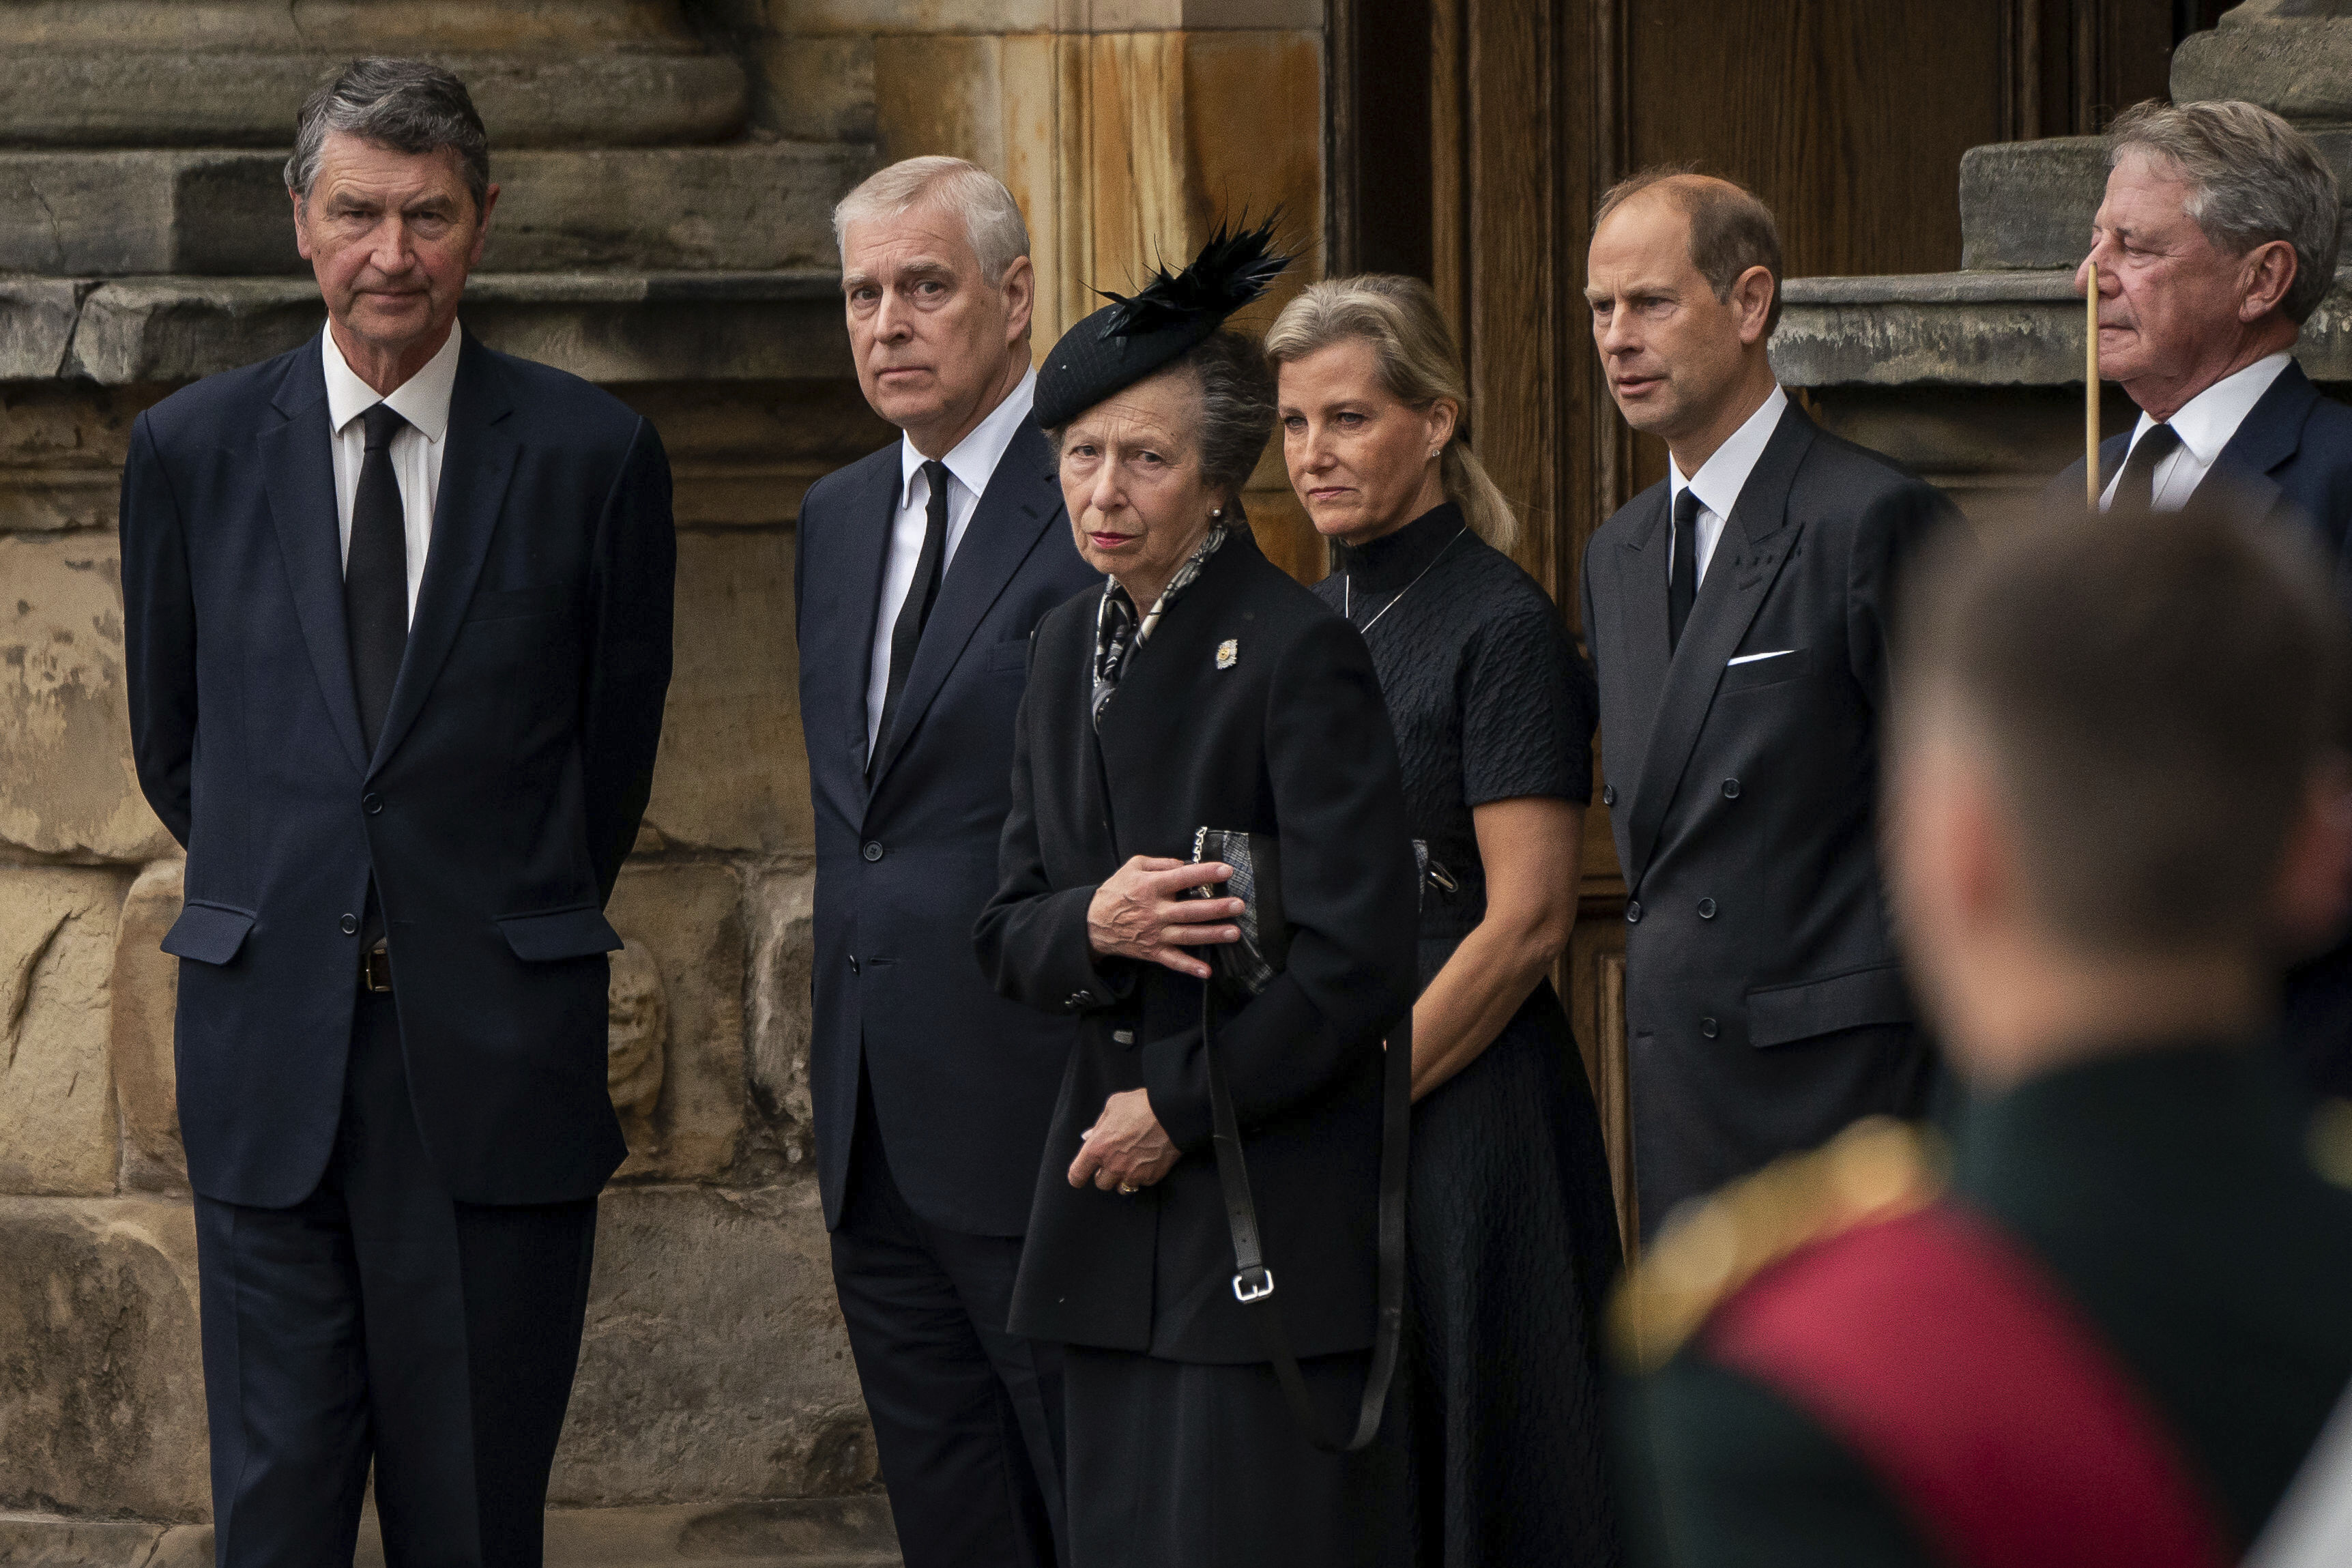 From left, Vice Admiral Timothy Laurence, Prince Andrew, Princess Anne, Sophie the Countess of Wessex and Prince Edward watch as the coffin of Queen Elizabeth II, draped with the Royal Standard of Scotland, completes its journey from Balmoral to the Palace of Holyroodhouse, where it will lie in rest for a day,  in Edinburgh, Sunday, Sept. 11, 2022. Queen Elizabeth II, Britain's longest-reigning monarch and a rock of stability across much of a turbulent century, died Thursday Sept. 8, 2022, after